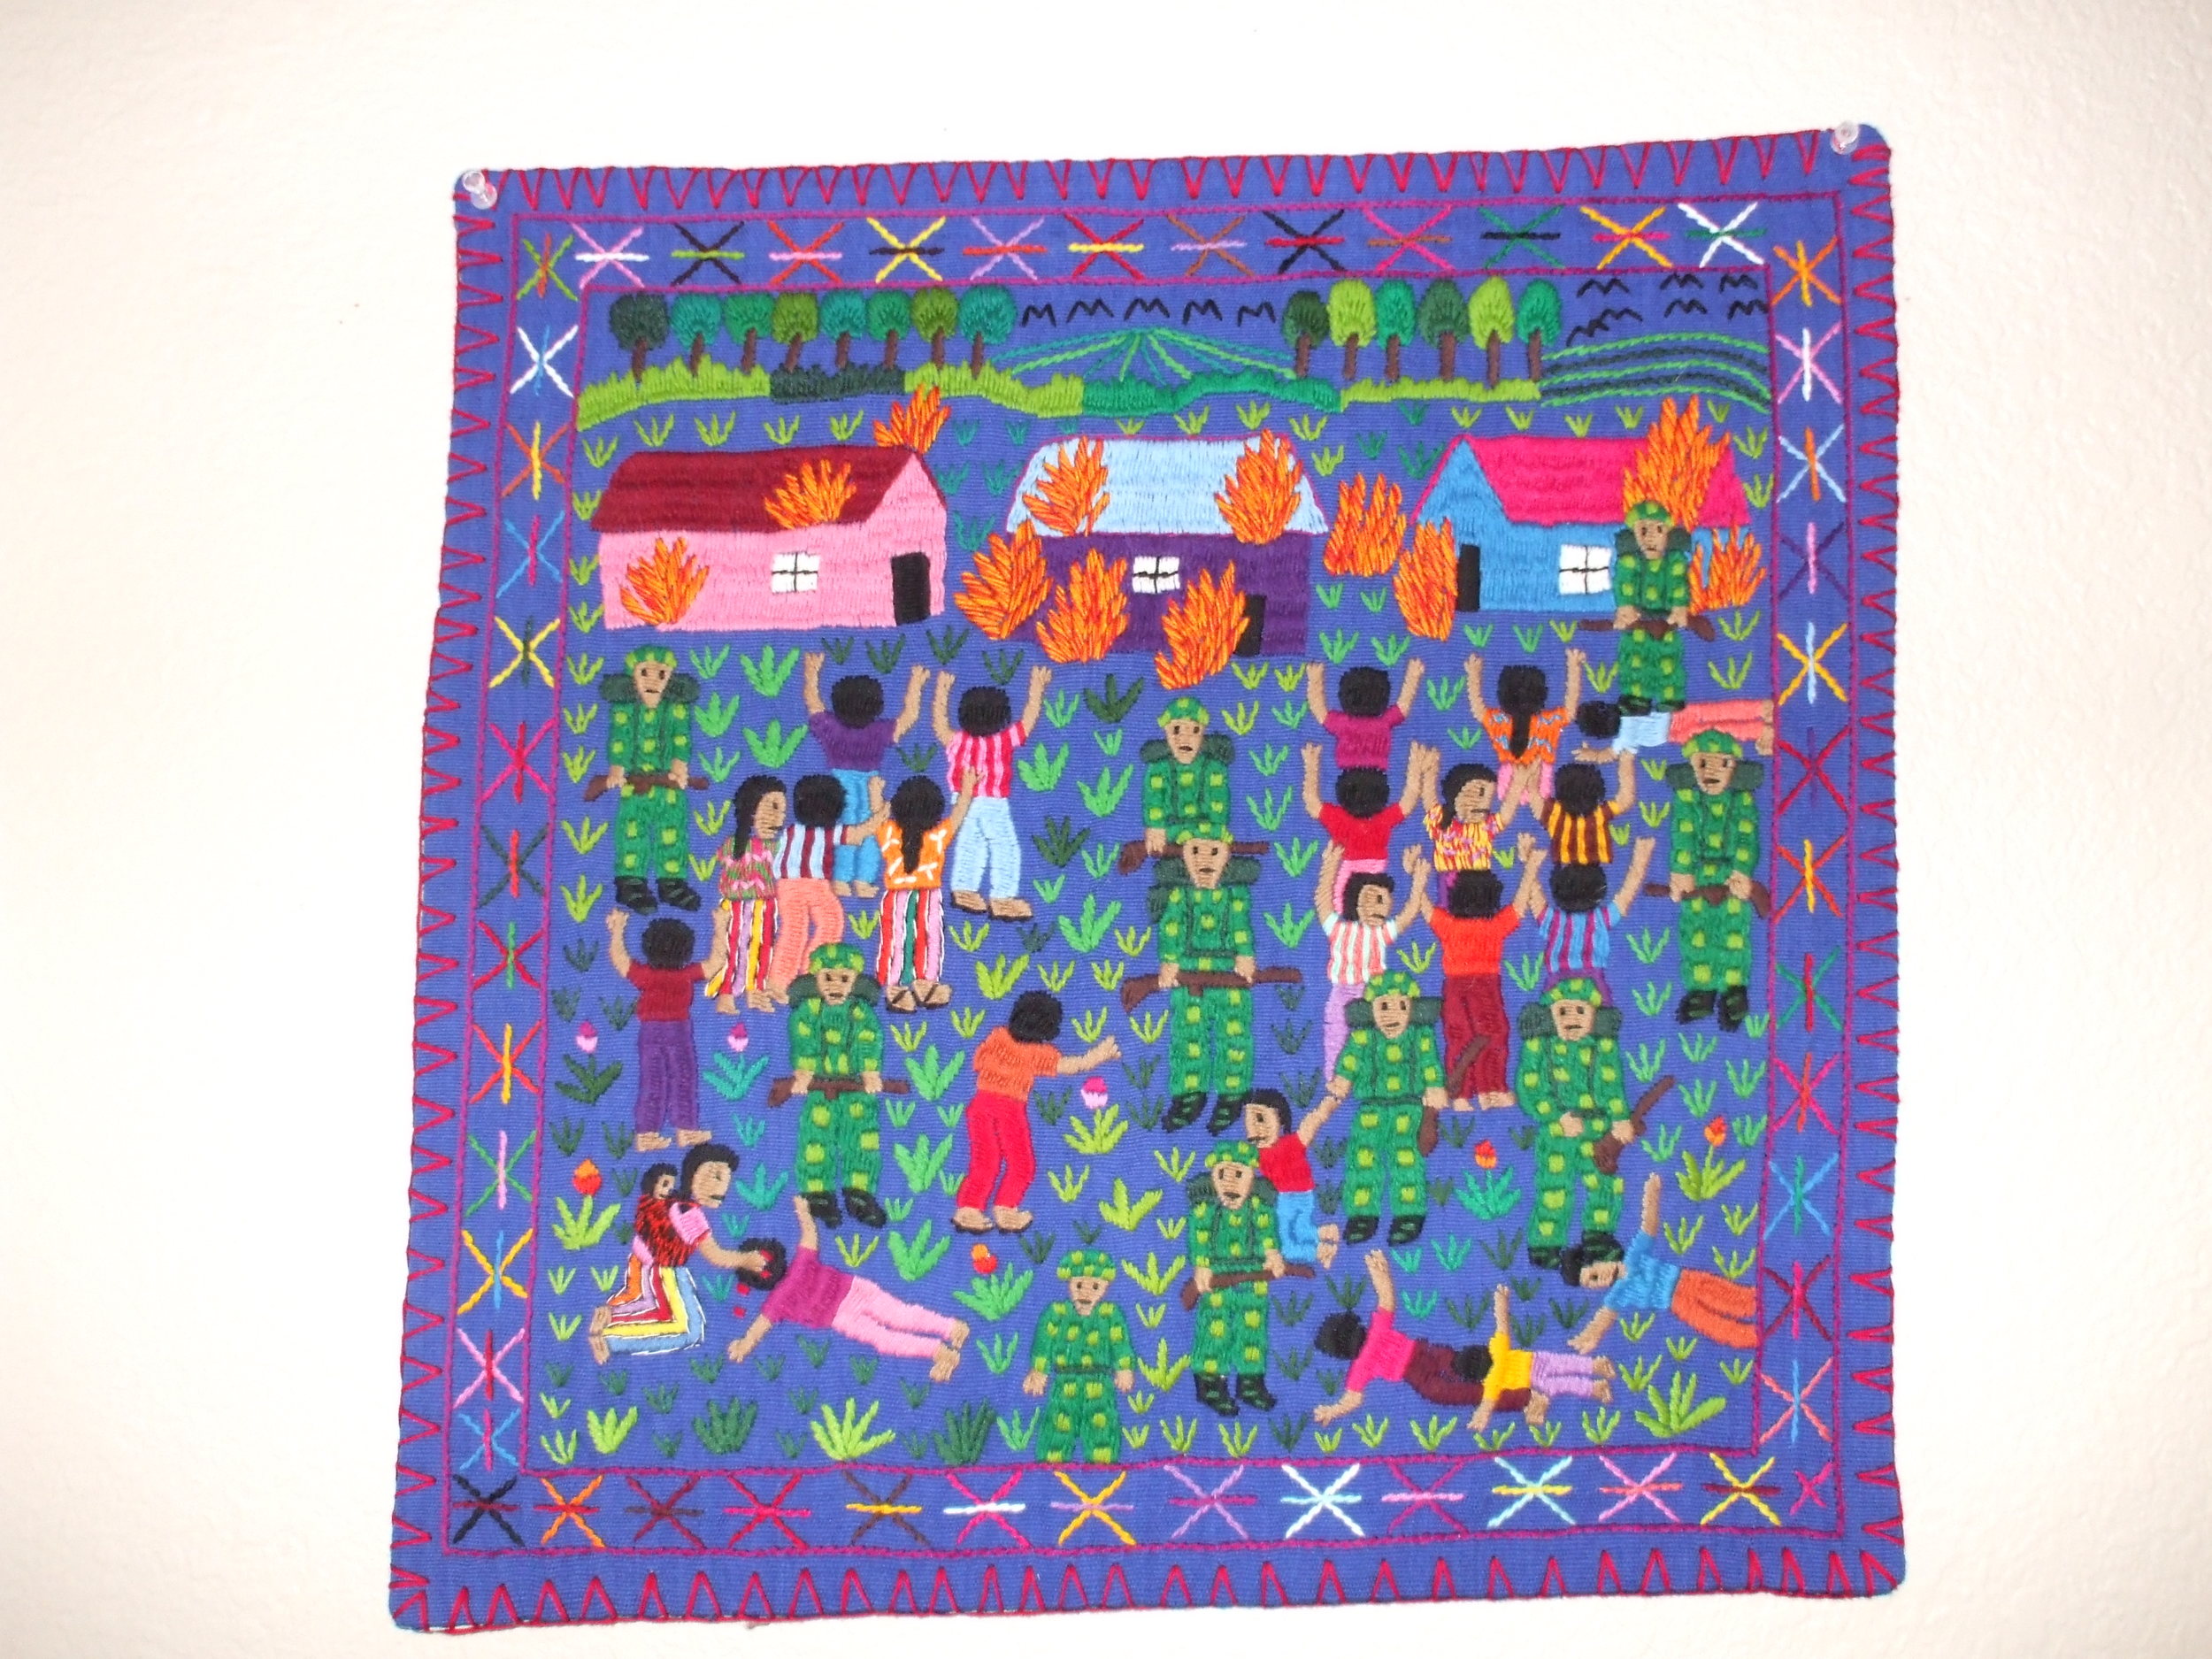 This arpillera is from a workshop in Guatemala started by Ramelle Gonzalez. She had to teach the Mayan women to embroider since they previously used weaving. Polyester yarn on cotton background. Photo courtesy of Dr. Deborah Deacon.